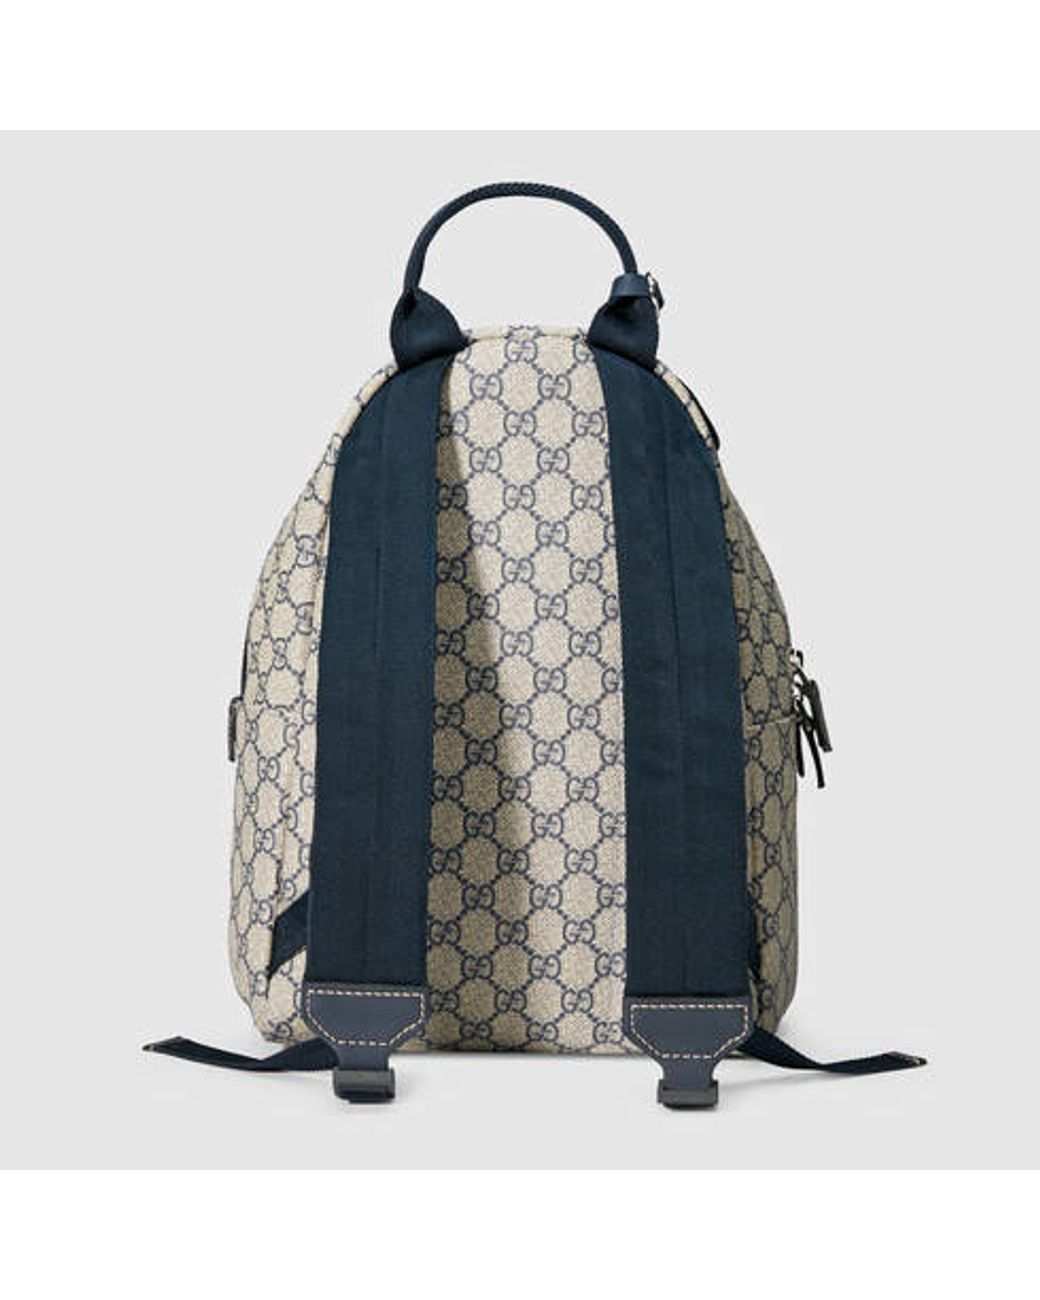 Gucci Children's Gg Supreme Backpack in Natural | Lyst